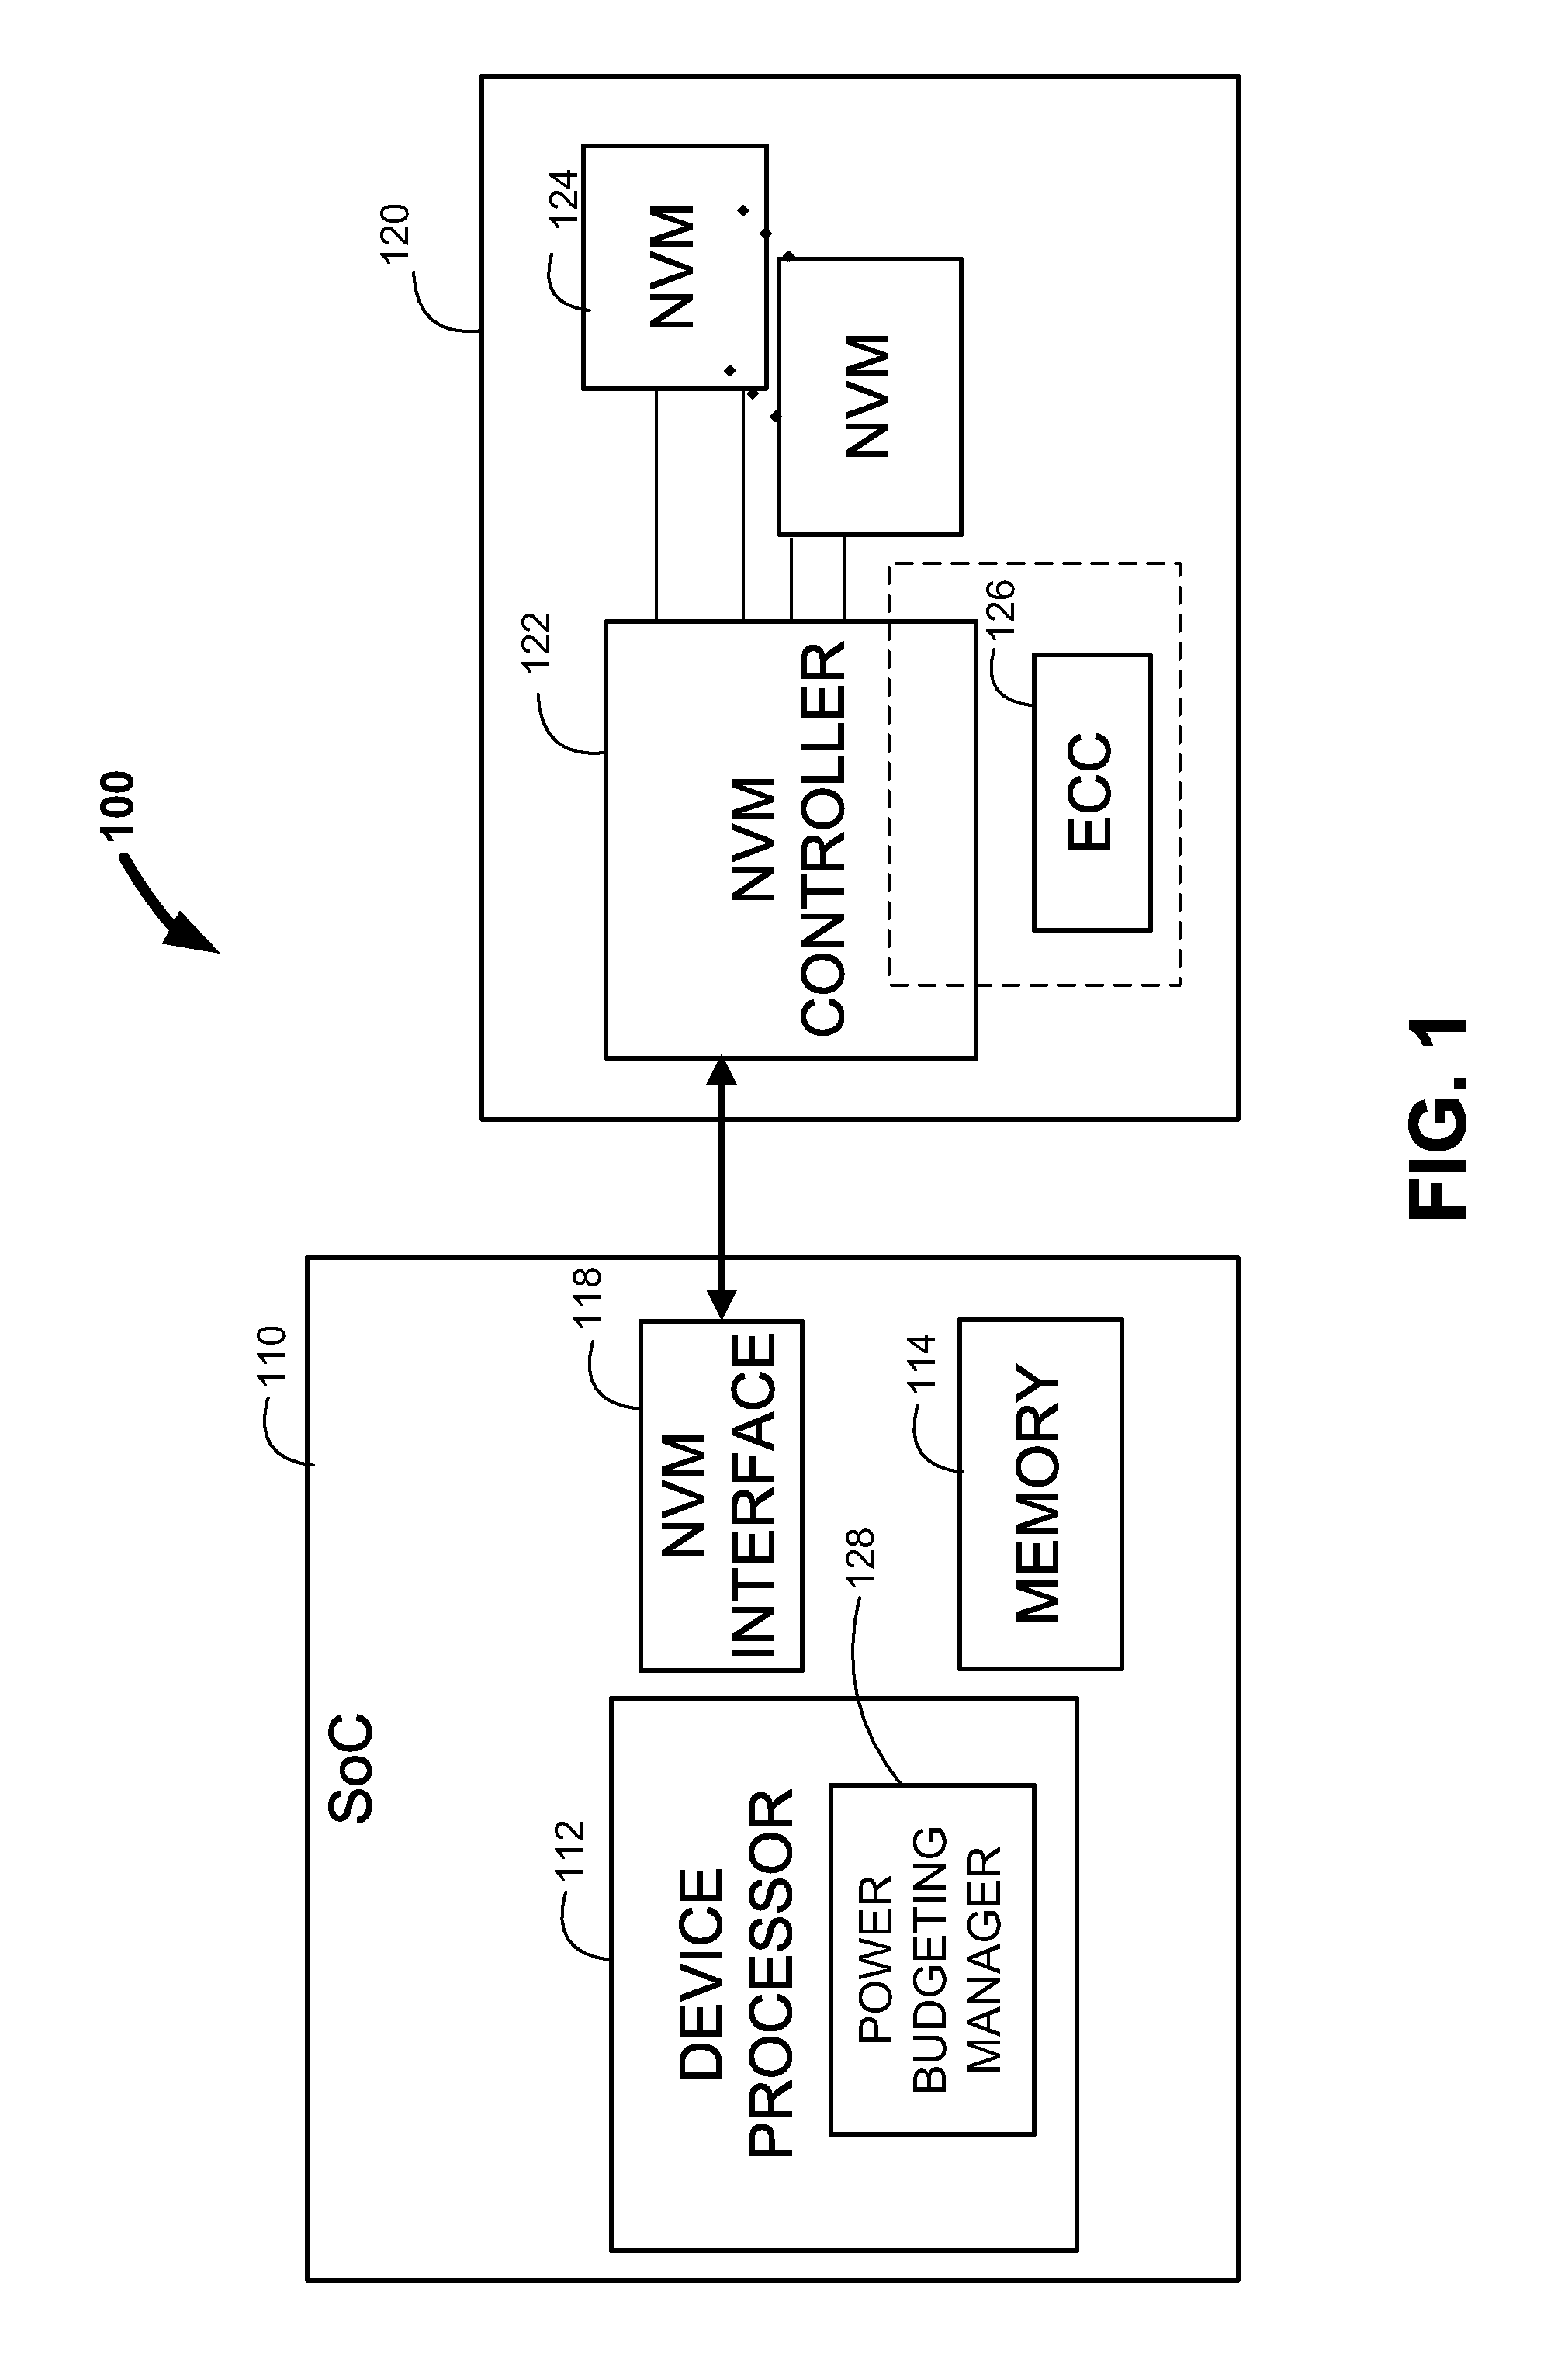 Dynamic allocation of power budget for a system having non-volatile memory